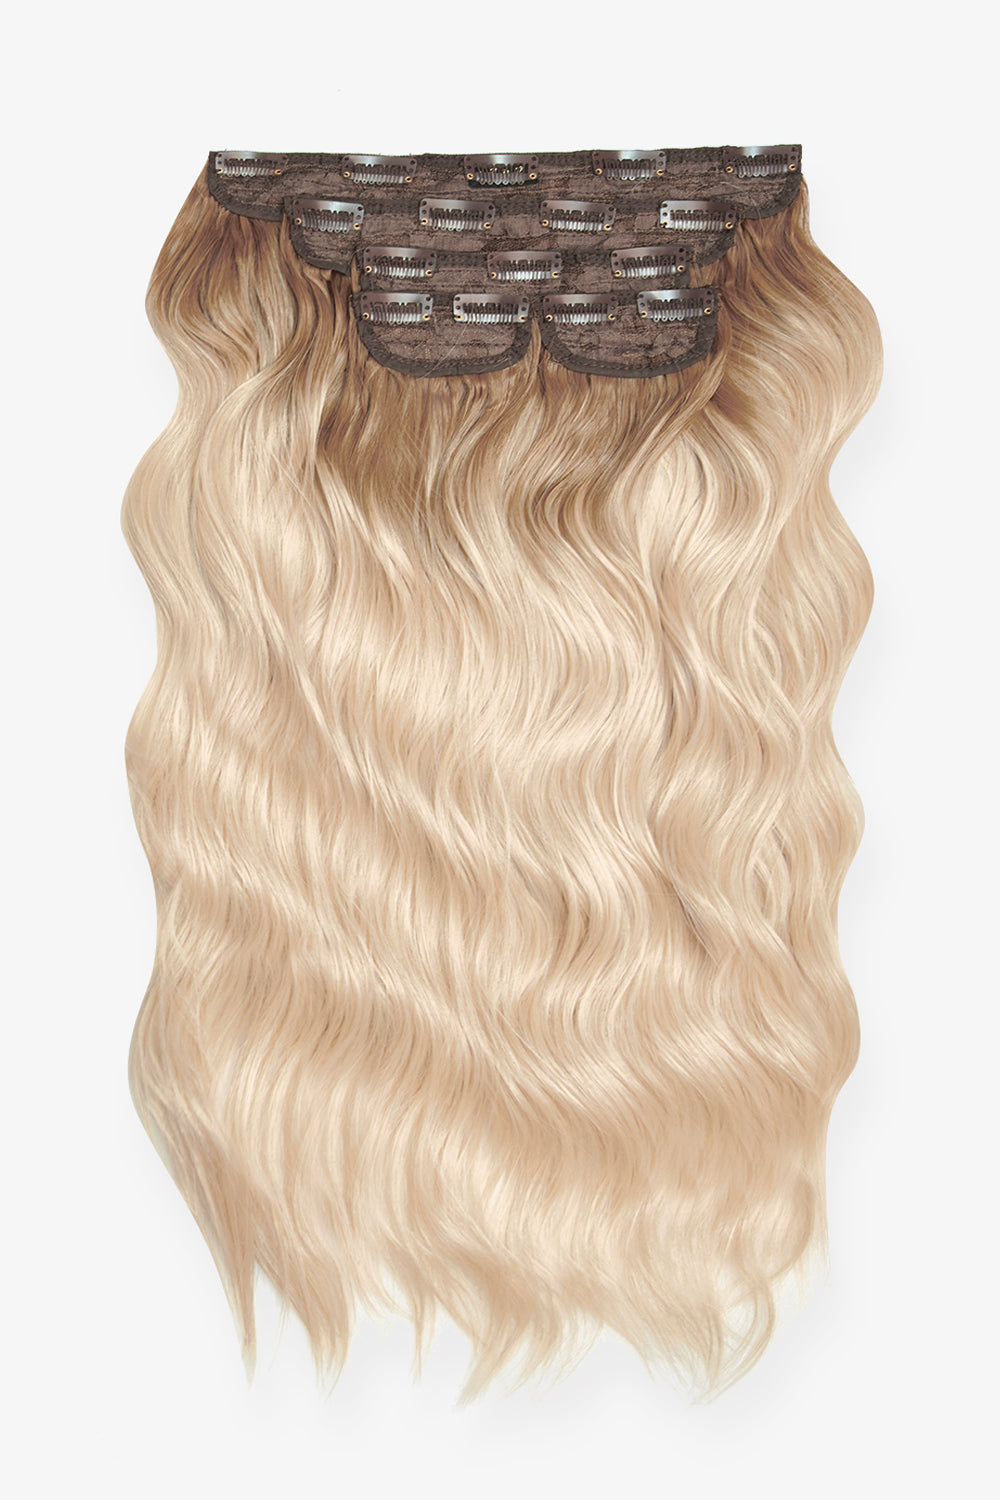 Super Thick 22’’ 5 Piece Brushed Out Wave Clip In Hair Extensions - Rooted Light Blonde